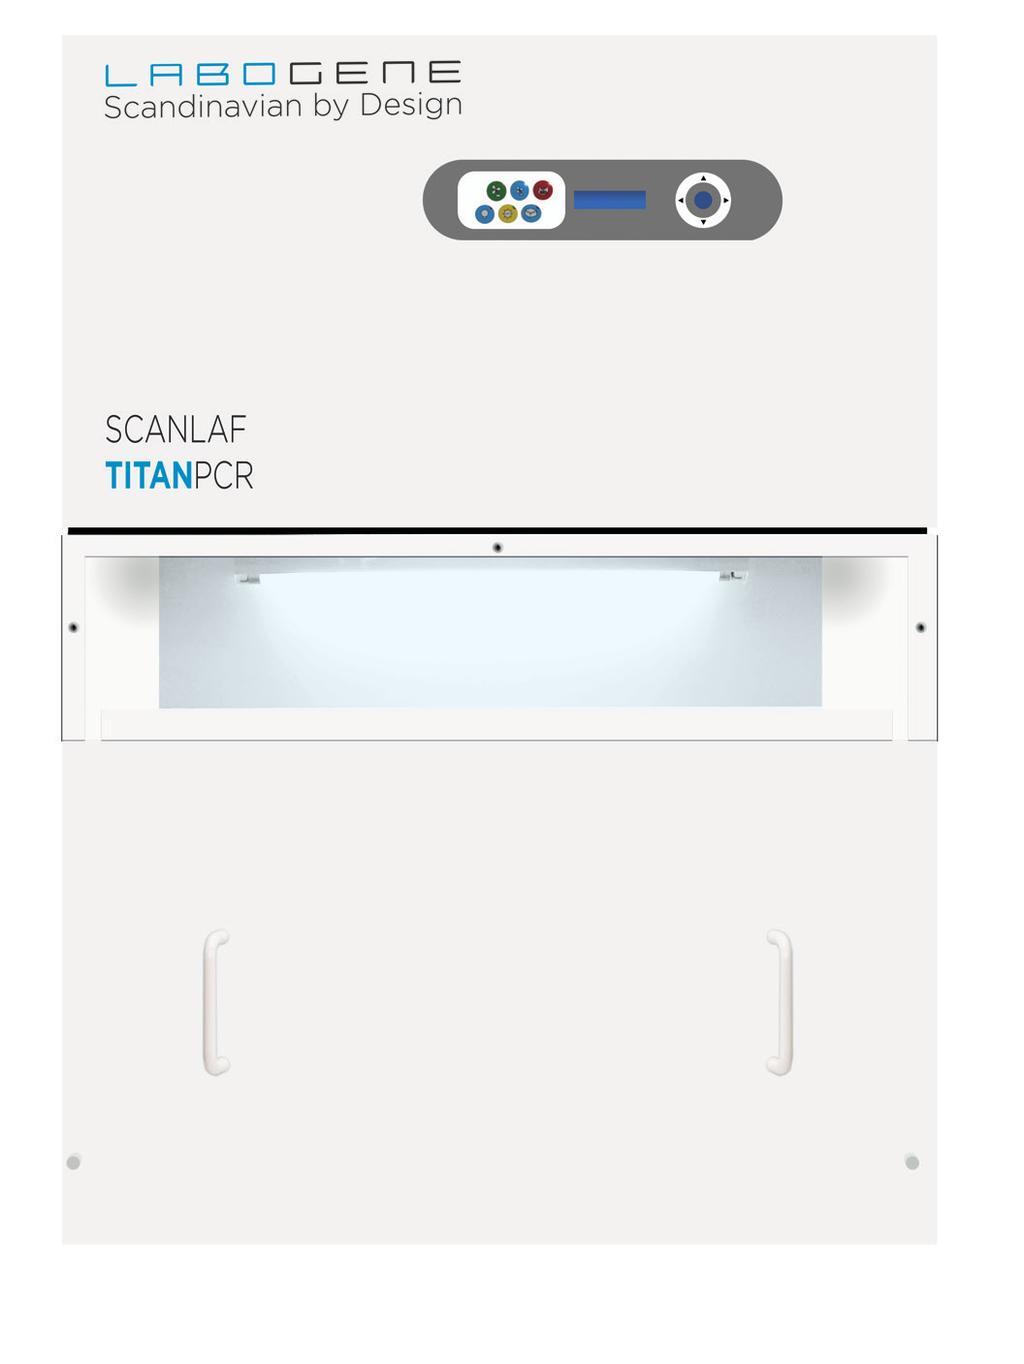 TITAN PCR OFFERS ADDITIONAL FEATURES & BENEFITS The integrated control panel with LCD display is conveniently positioned for easy viewing and operation.